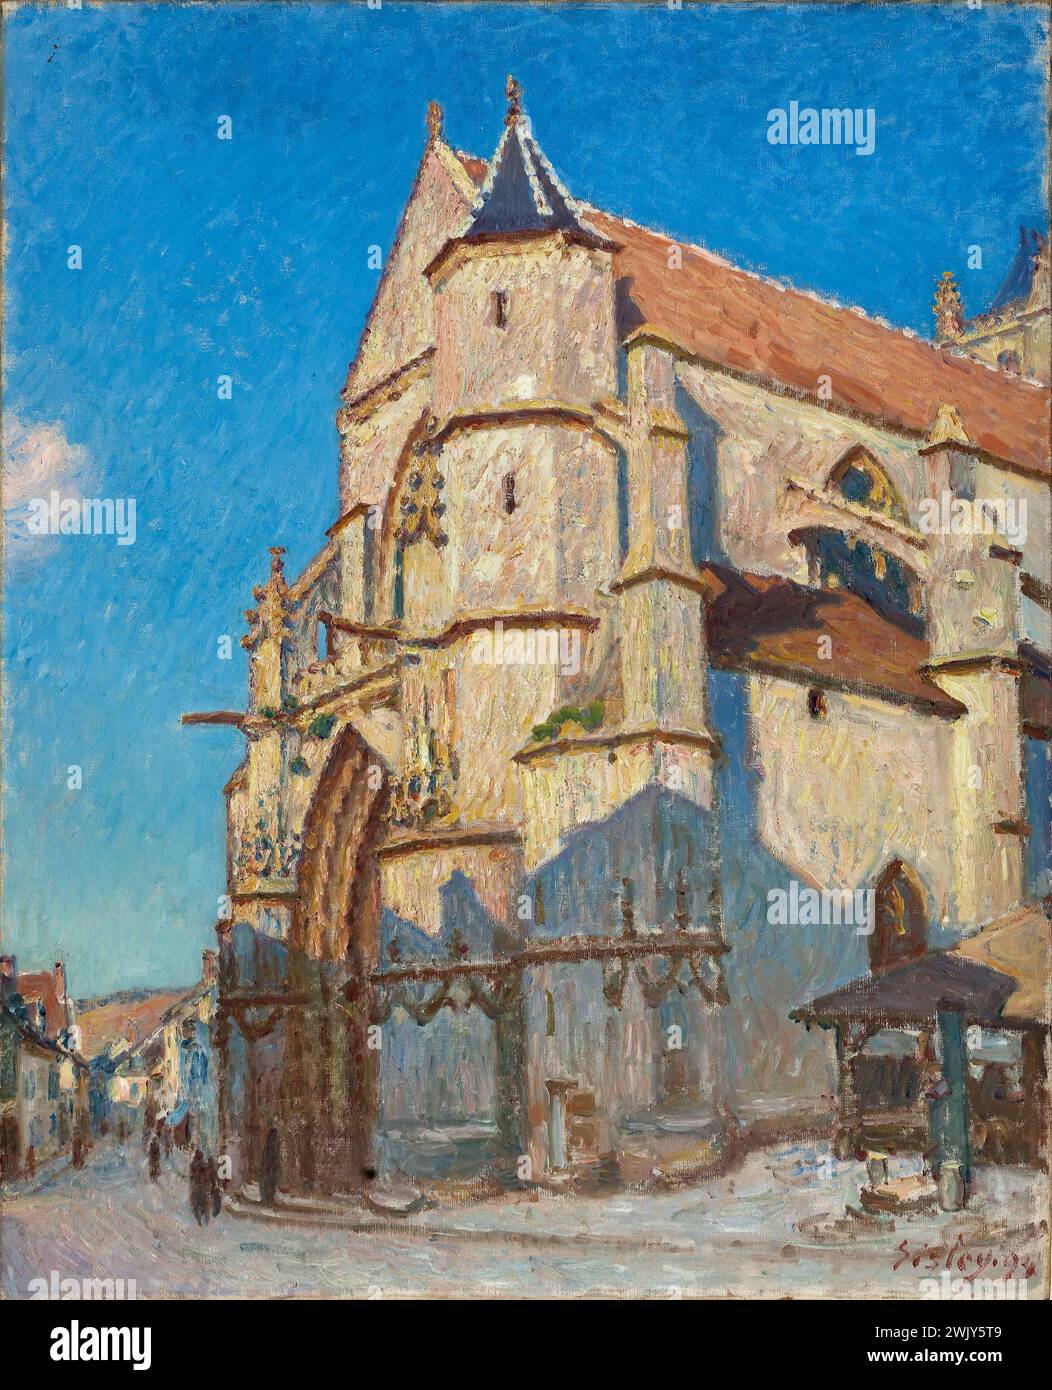 Alfred Sisley (1839-1899). 'The Church of Moret (in the evening)'. Oil on canvas. 1894. Museum of Fine Arts of the City of Paris, Petit Palais. 70009-1 Catholicism, Religious Edifice, Church of Moret, Impressionism, Lumiere, Work of art, evening, Table, 19th XIXth century, 19th XIX 19th 19th 19th 19th century, Oil on canvas Stock Photo